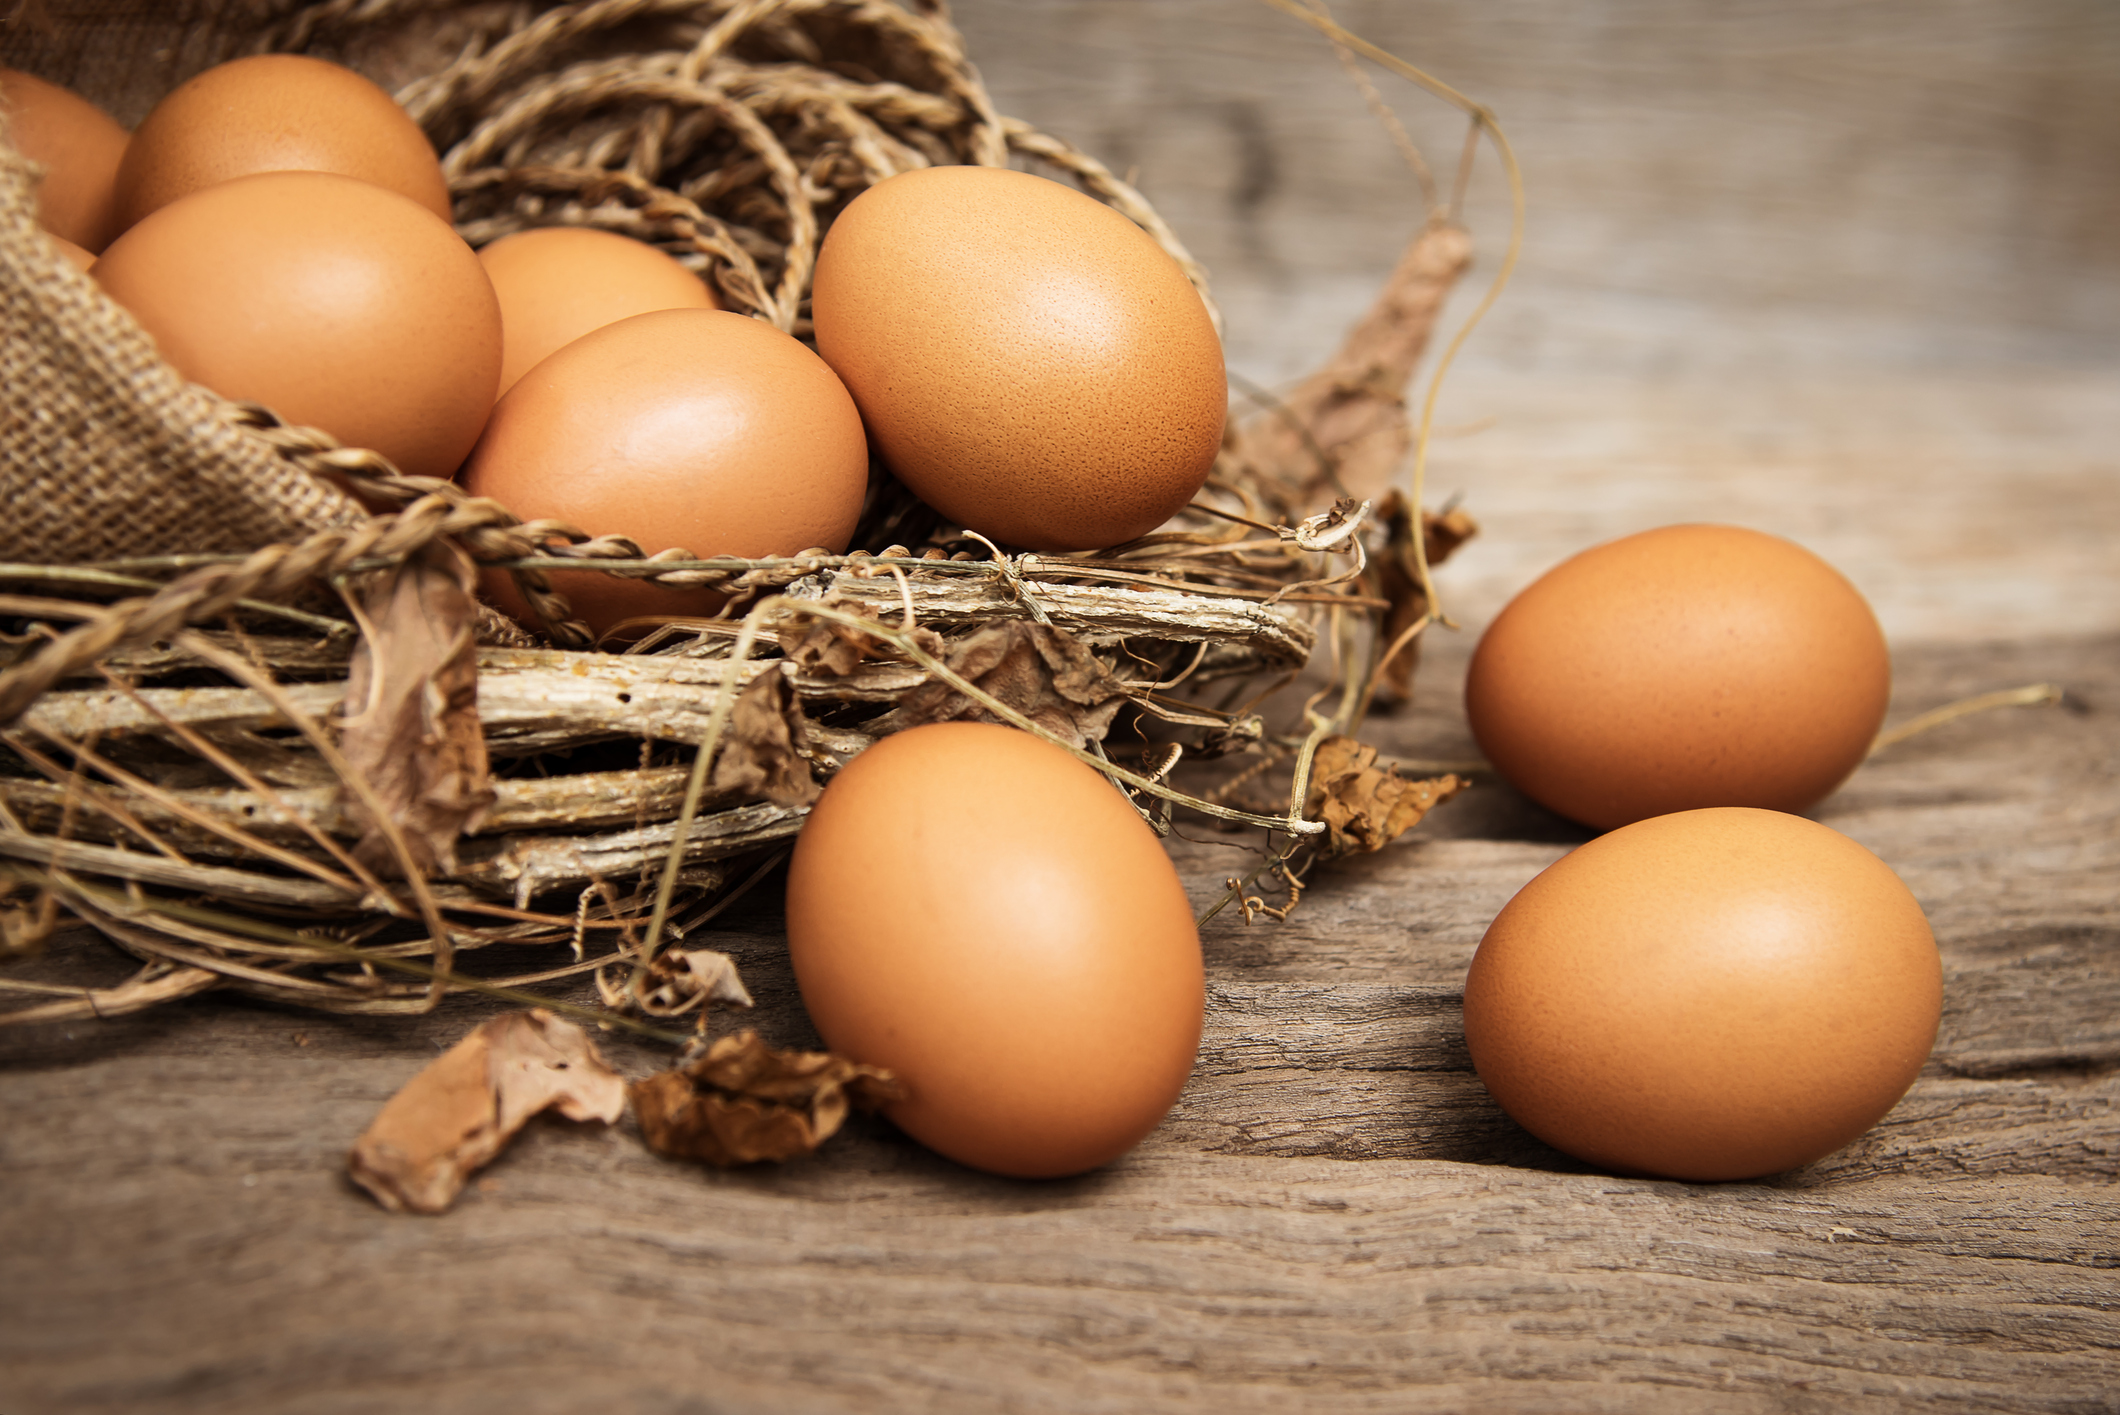 Celebrity chefs are being asked to help persuade consumers to buy all sizes of eggs.